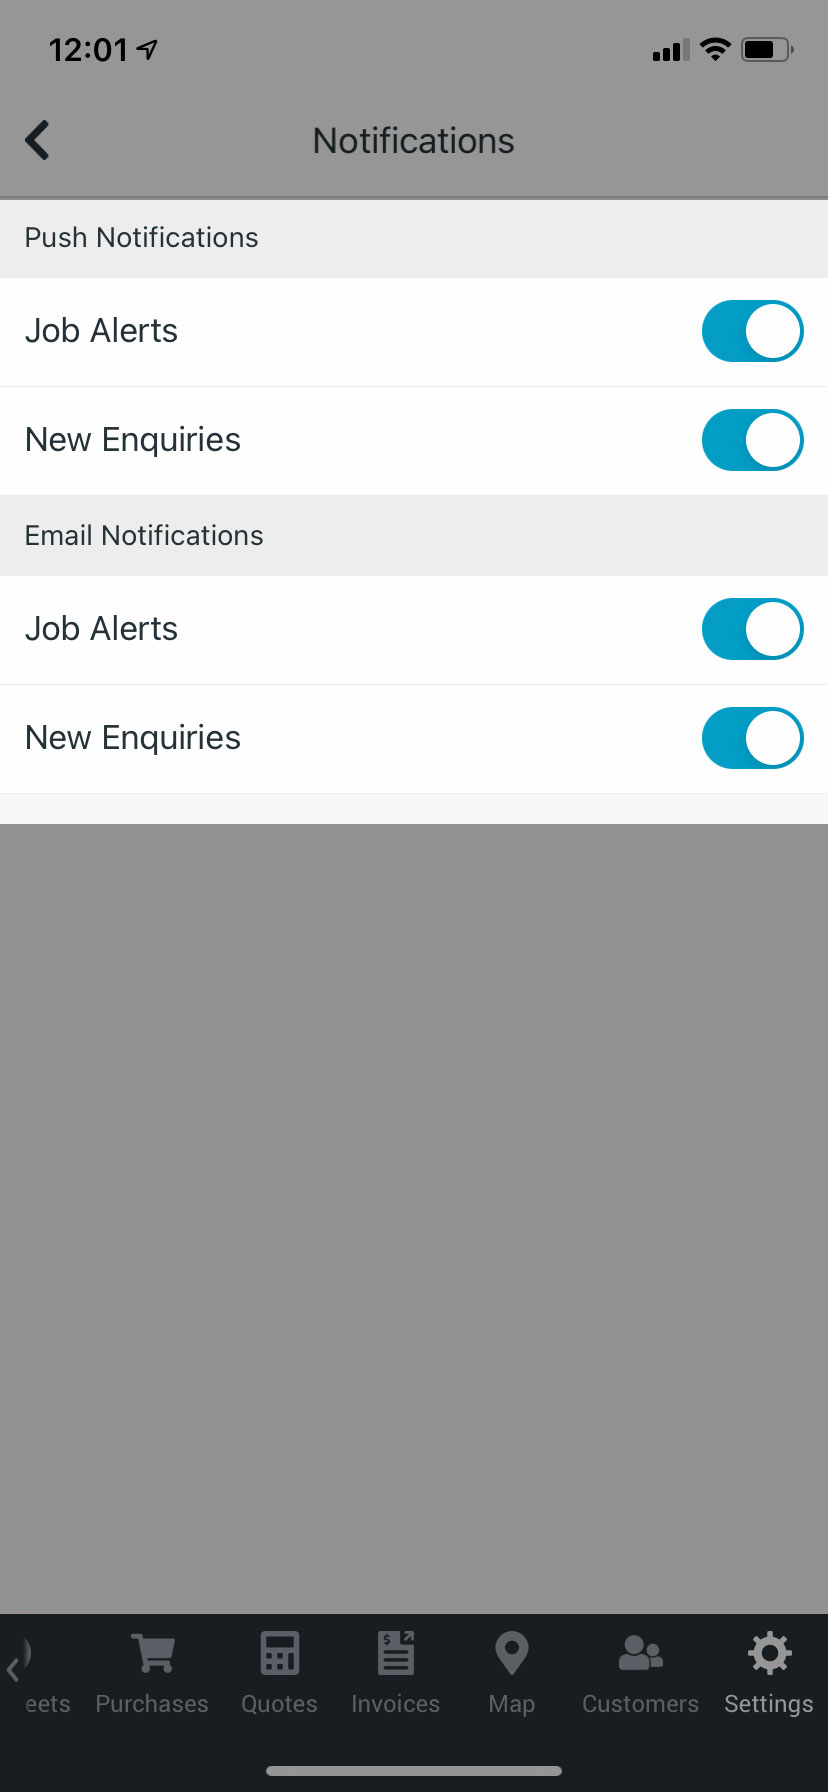 Notifications-Settings-Page-on-Tradify-Mobile-App.jpg